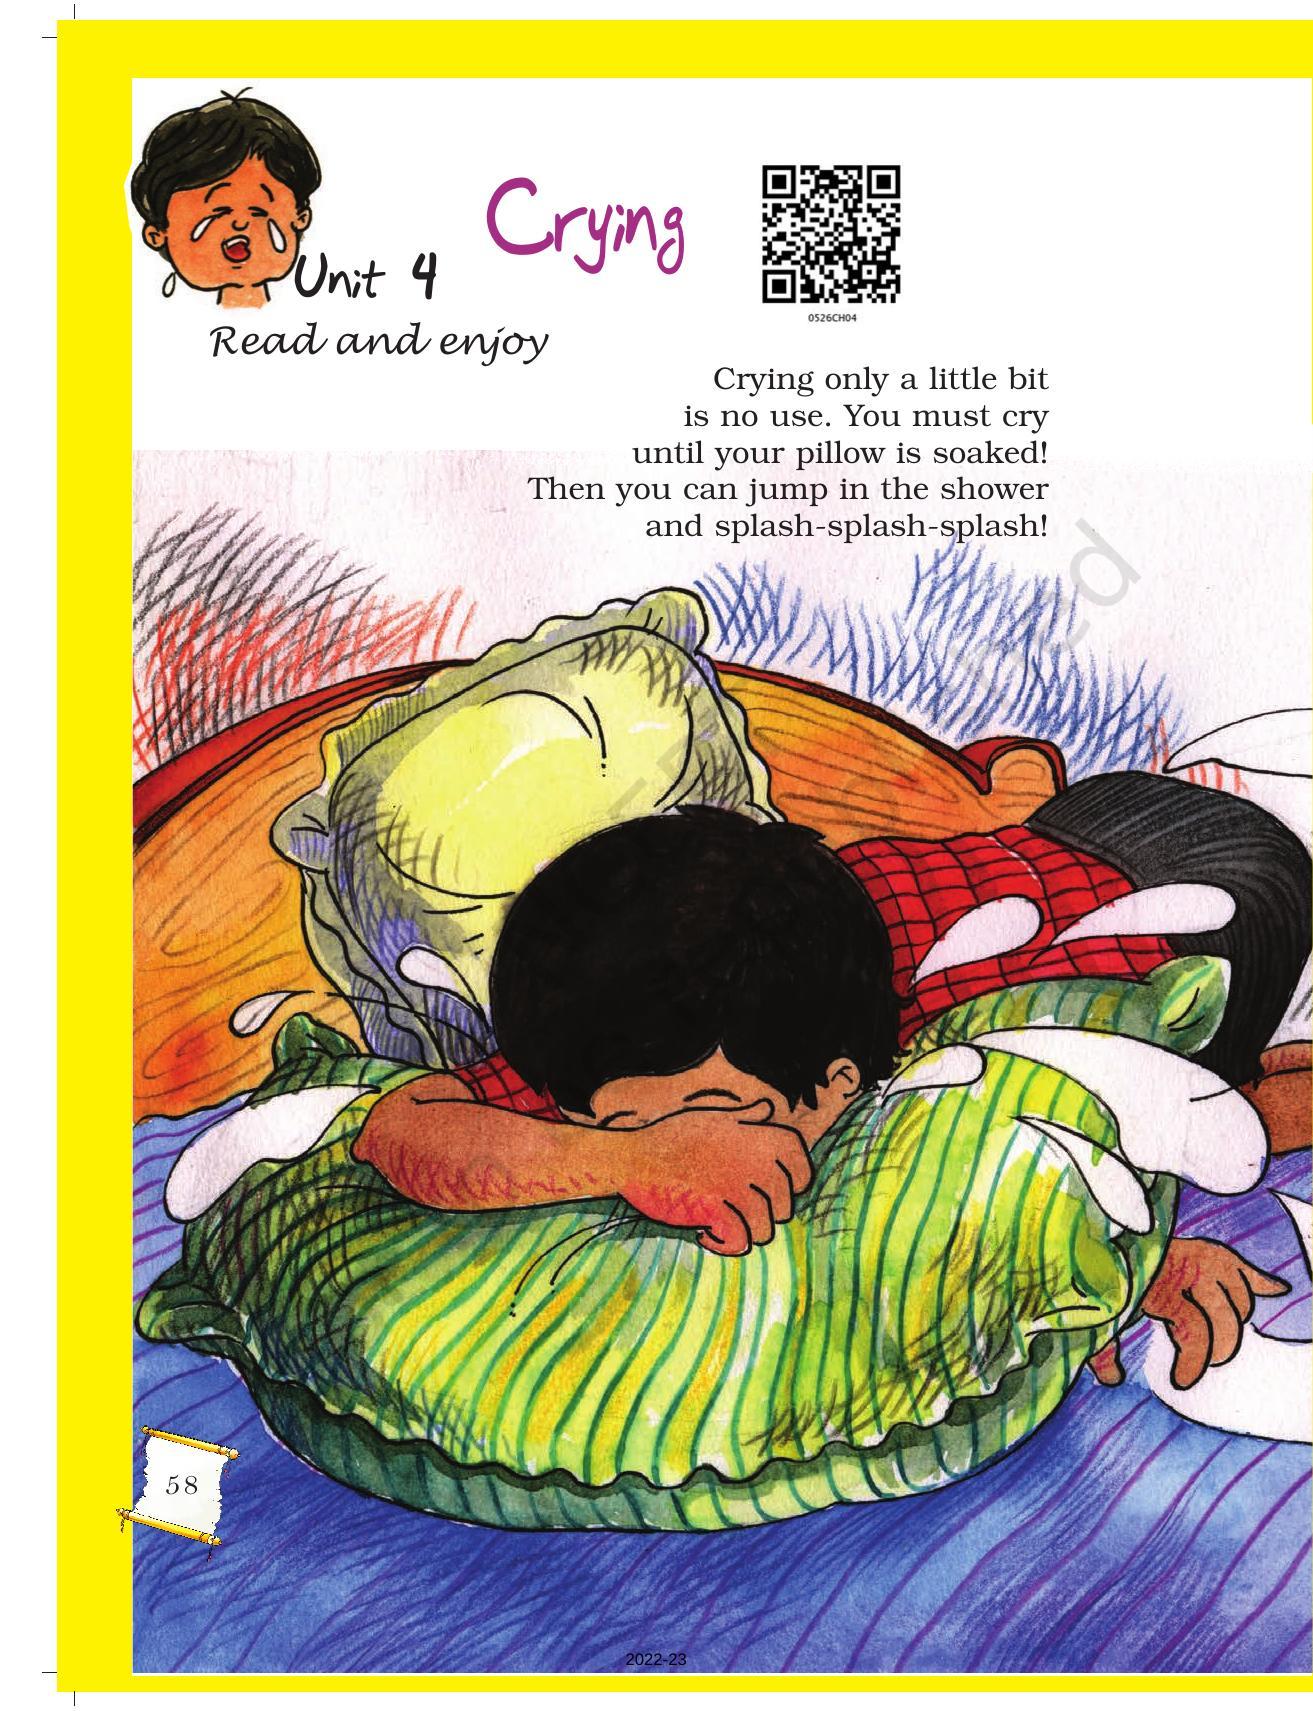 NCERT Book for Class 5 English Chapter 4 Crying - Page 1